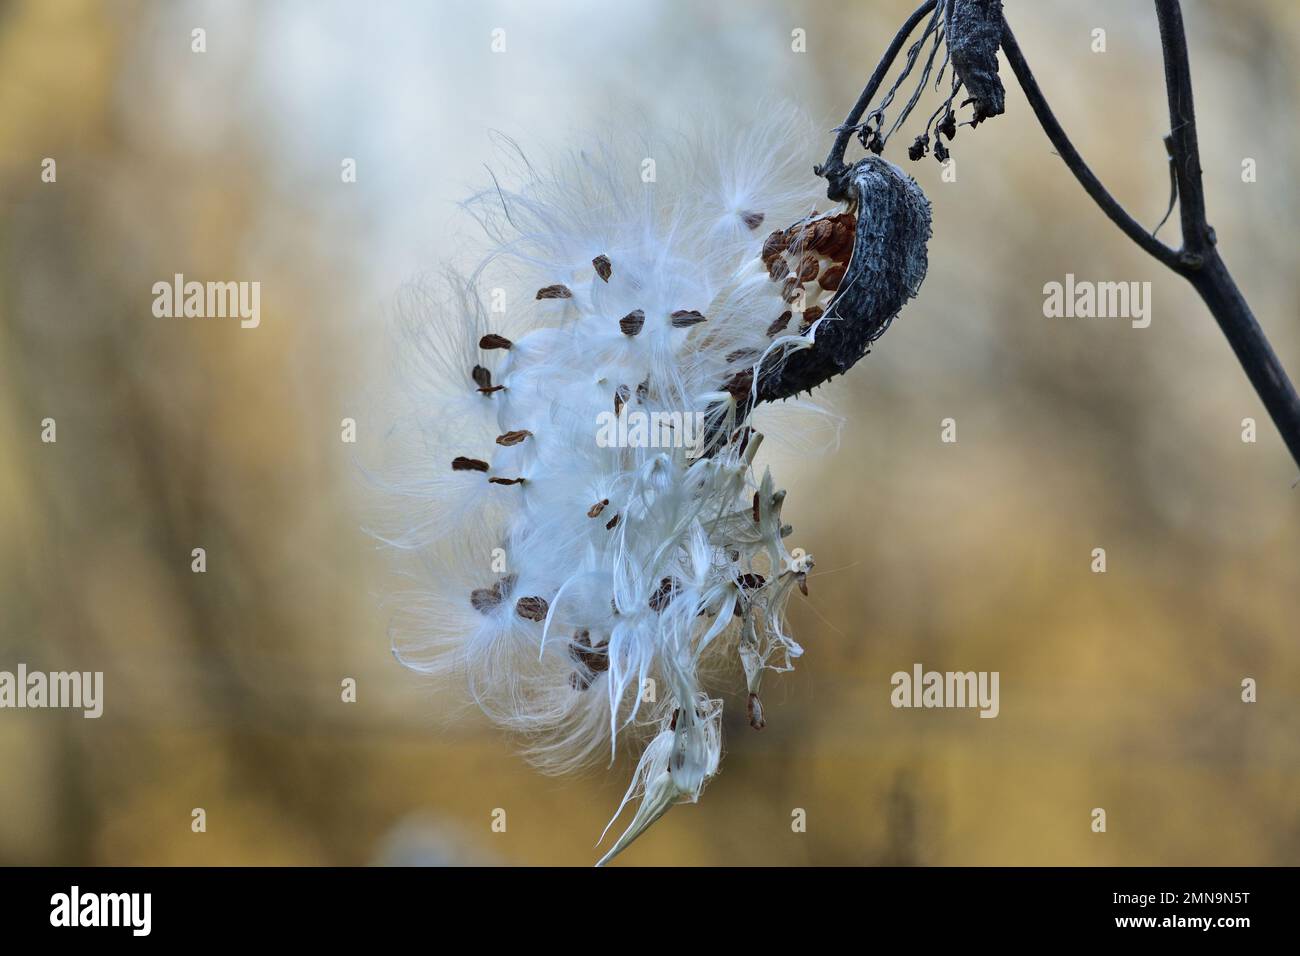 Seeds emerging from a follicle, Asclepias syriaca Stock Photo